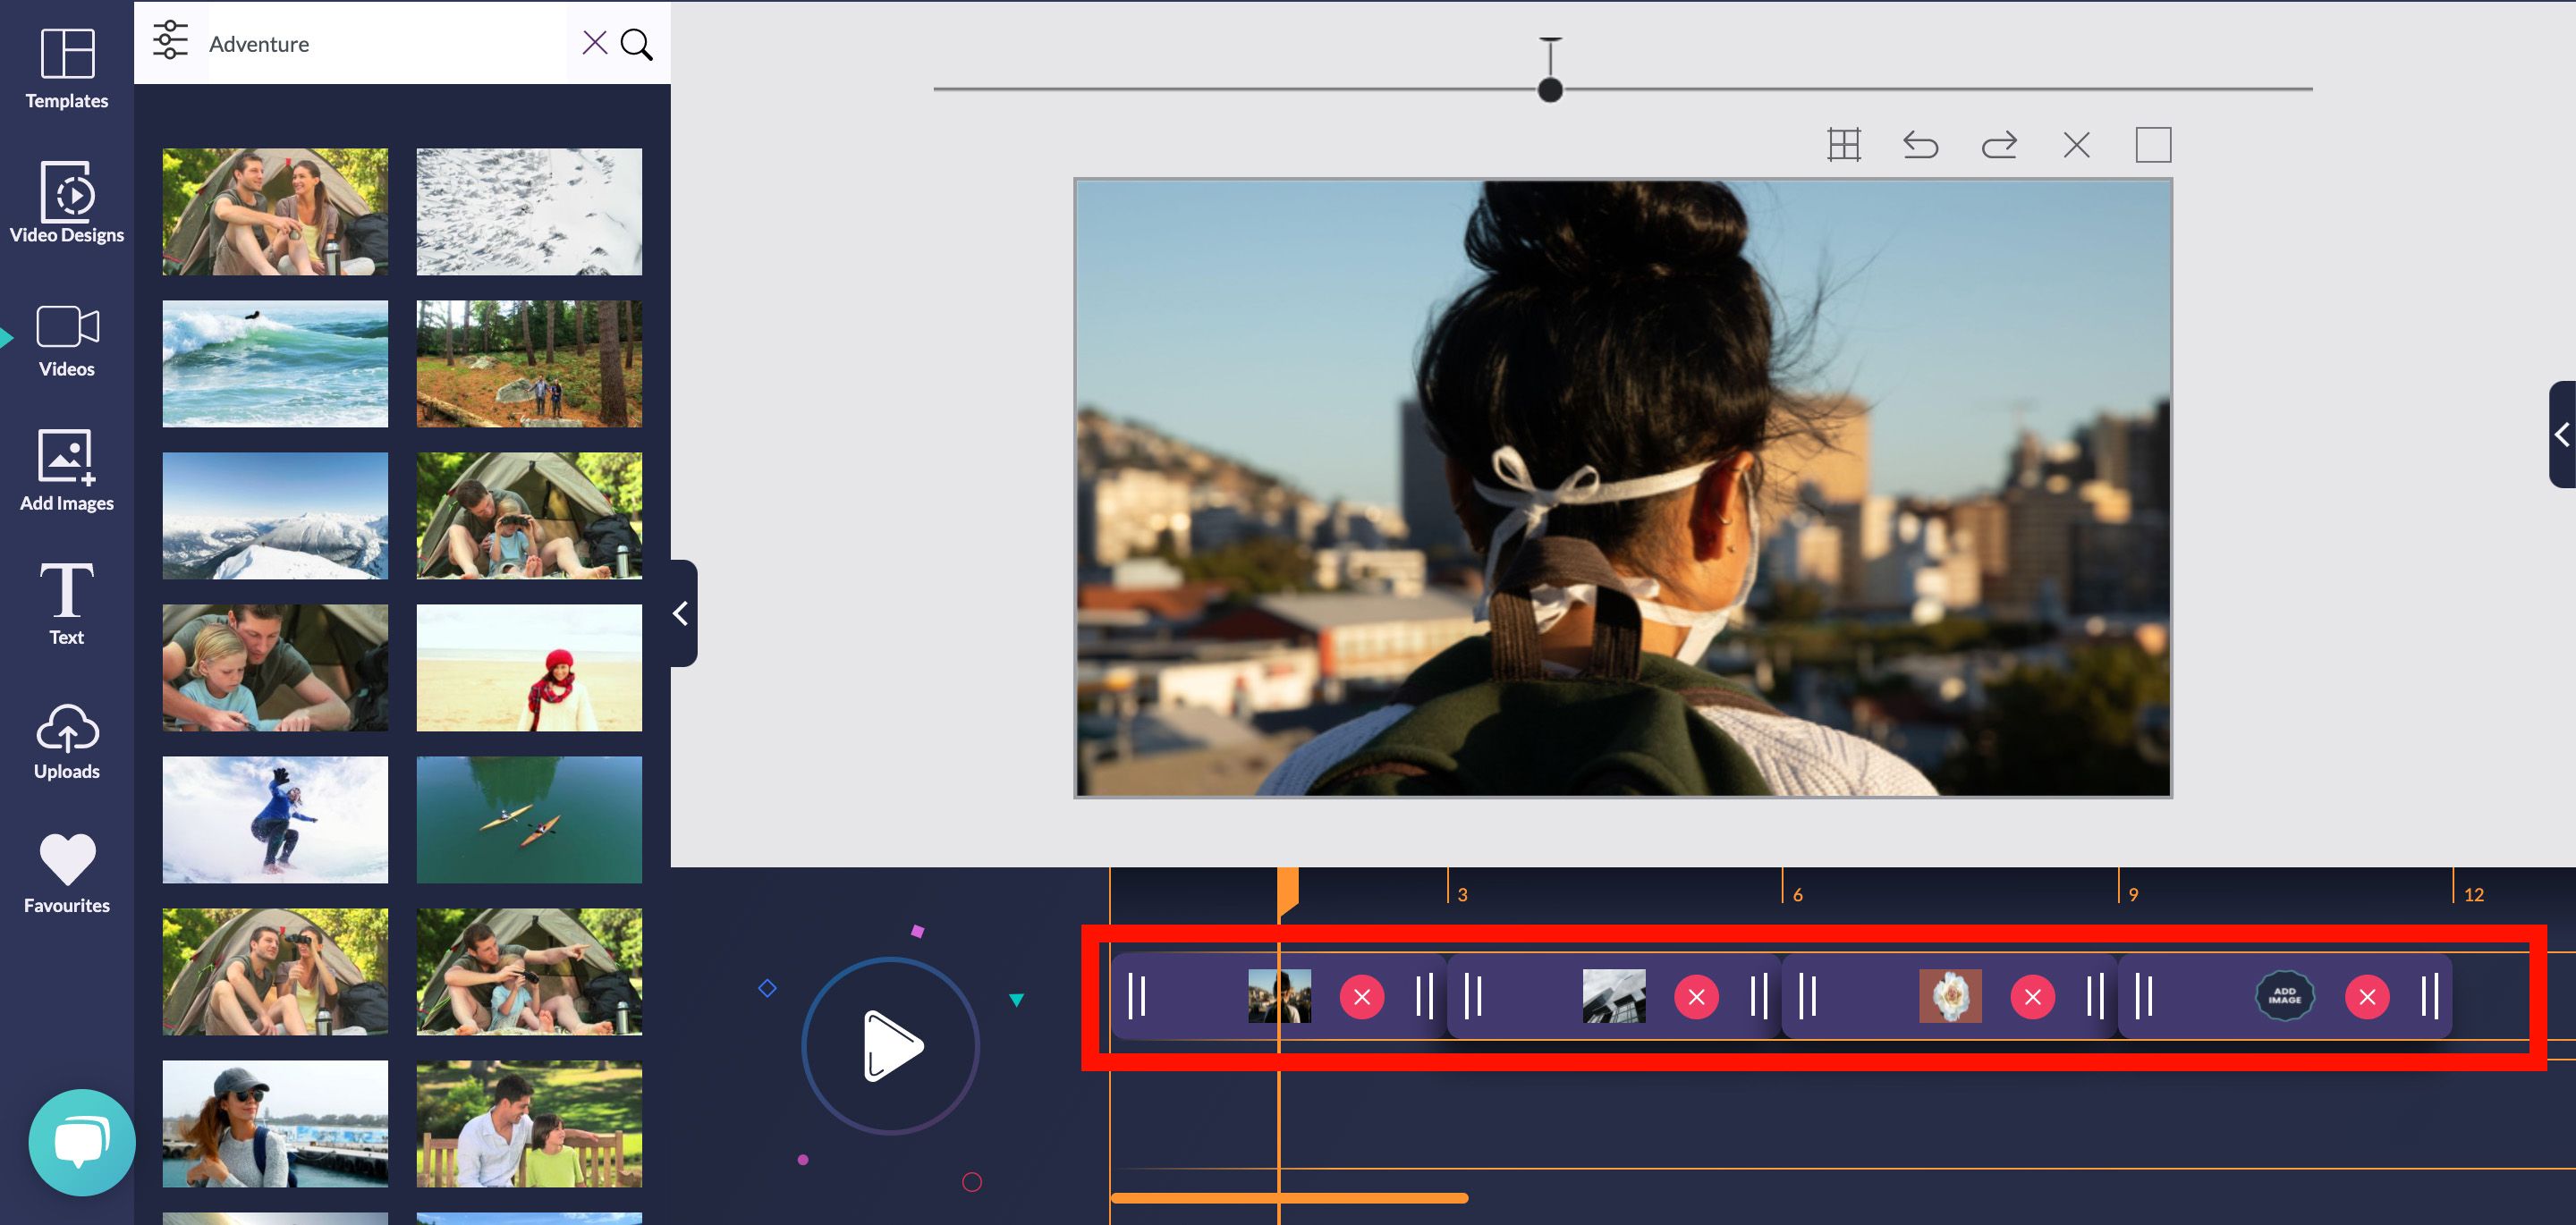  - Step-by-step guide on how to make a video from photos with the Design Wizard - ImageScreenshot of multiple photos placed on the timeline